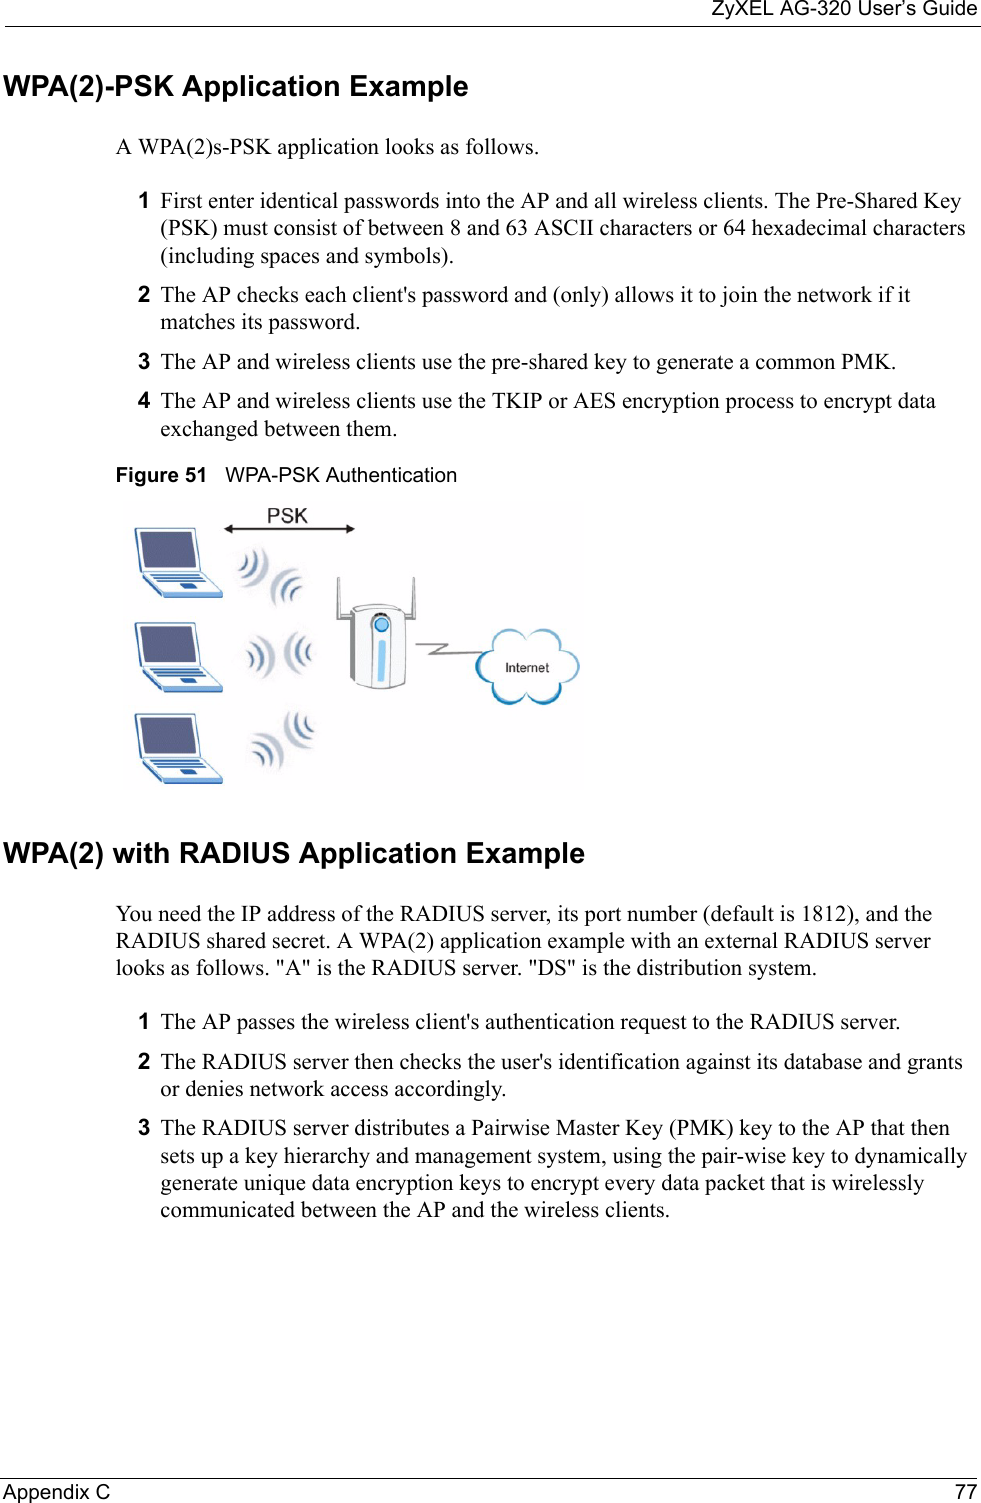 ZyXEL AG-320 User’s GuideAppendix C 77WPA(2)-PSK Application ExampleA WPA(2)s-PSK application looks as follows.1First enter identical passwords into the AP and all wireless clients. The Pre-Shared Key (PSK) must consist of between 8 and 63 ASCII characters or 64 hexadecimal characters (including spaces and symbols).2The AP checks each client&apos;s password and (only) allows it to join the network if it matches its password.3The AP and wireless clients use the pre-shared key to generate a common PMK.4The AP and wireless clients use the TKIP or AES encryption process to encrypt data exchanged between them.Figure 51   WPA-PSK AuthenticationWPA(2) with RADIUS Application ExampleYou need the IP address of the RADIUS server, its port number (default is 1812), and the RADIUS shared secret. A WPA(2) application example with an external RADIUS server looks as follows. &quot;A&quot; is the RADIUS server. &quot;DS&quot; is the distribution system.1The AP passes the wireless client&apos;s authentication request to the RADIUS server.2The RADIUS server then checks the user&apos;s identification against its database and grants or denies network access accordingly.3The RADIUS server distributes a Pairwise Master Key (PMK) key to the AP that then sets up a key hierarchy and management system, using the pair-wise key to dynamically generate unique data encryption keys to encrypt every data packet that is wirelessly communicated between the AP and the wireless clients.